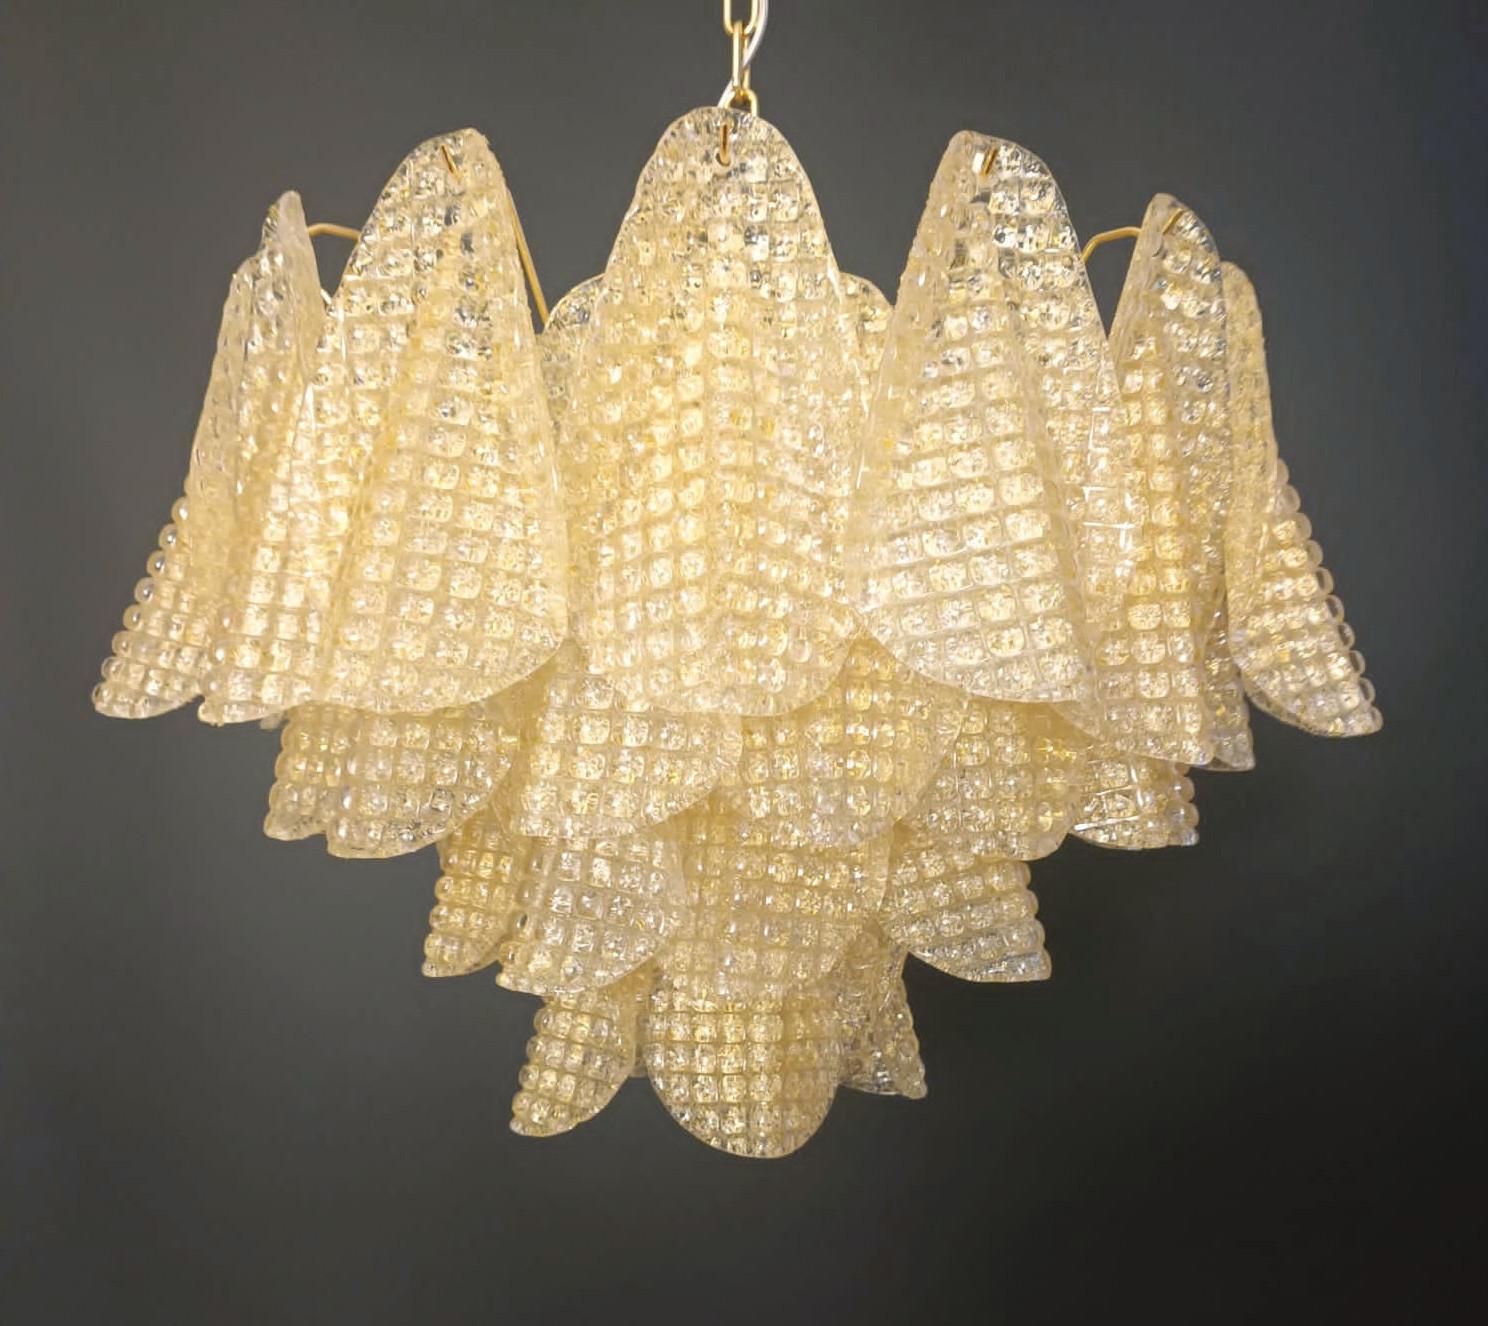 Italian chandelier clear textured Murano glass petals hand blown with amber Graniglia to produce granular textured effect, mounted on gold finish metal frame / Made in Italy
6 lights / E12 or E14 type / max 40W each
Measures: Diameter: 21.5 inches /